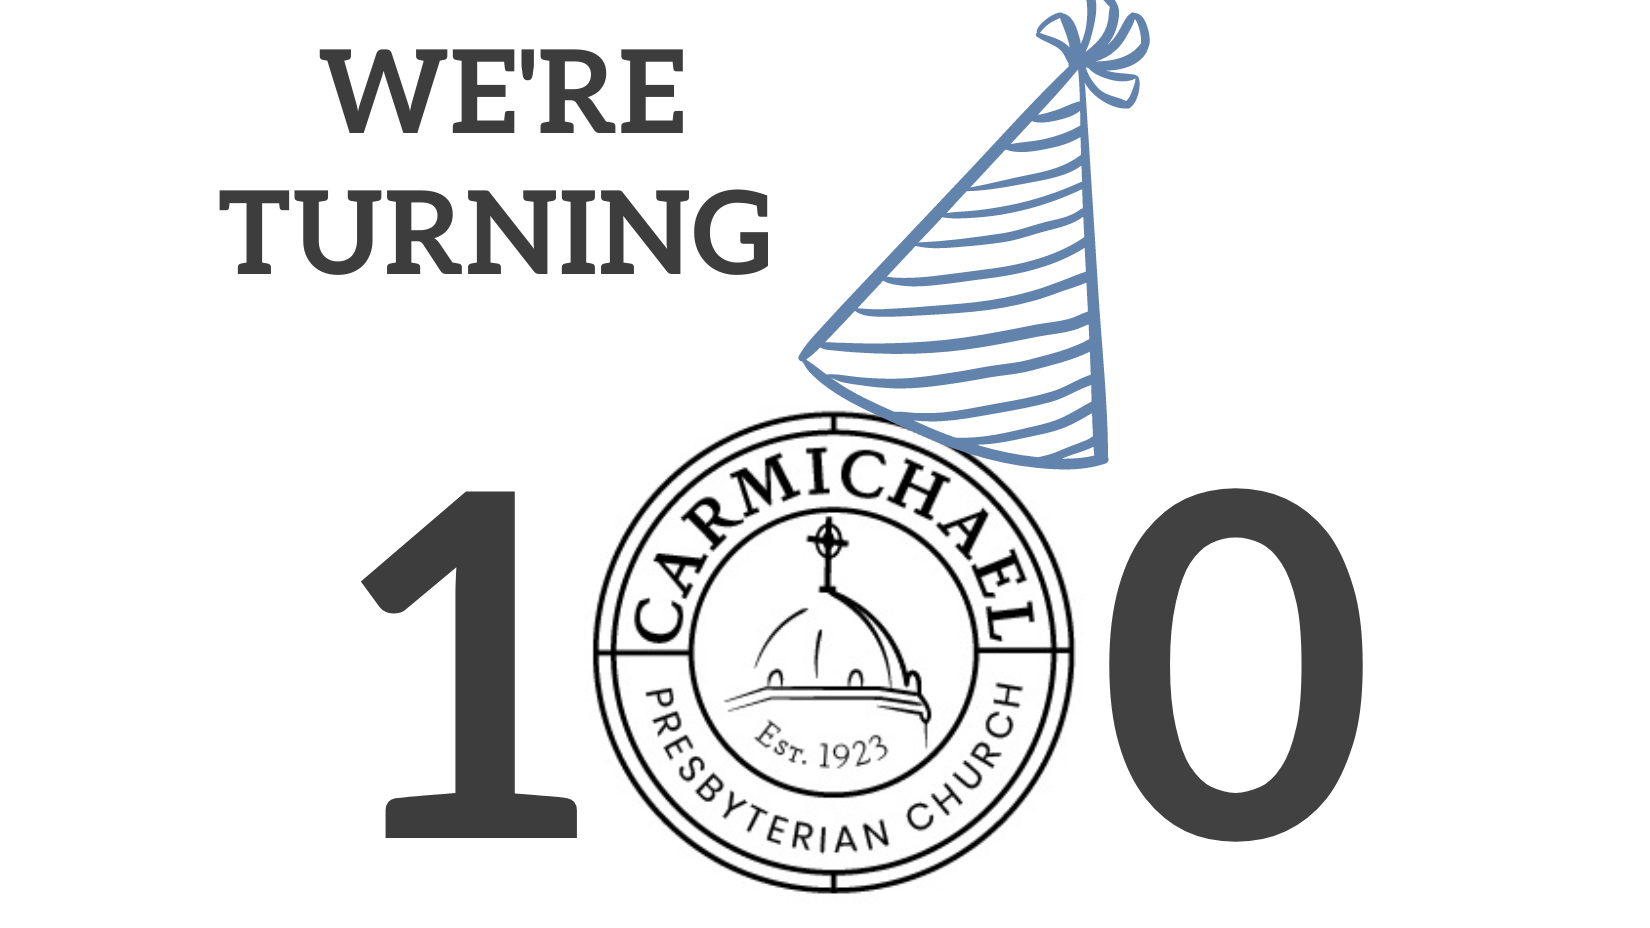 We're Turning 100 with the Carmichael Presbyterian logo as the center zero with a blue party hat.